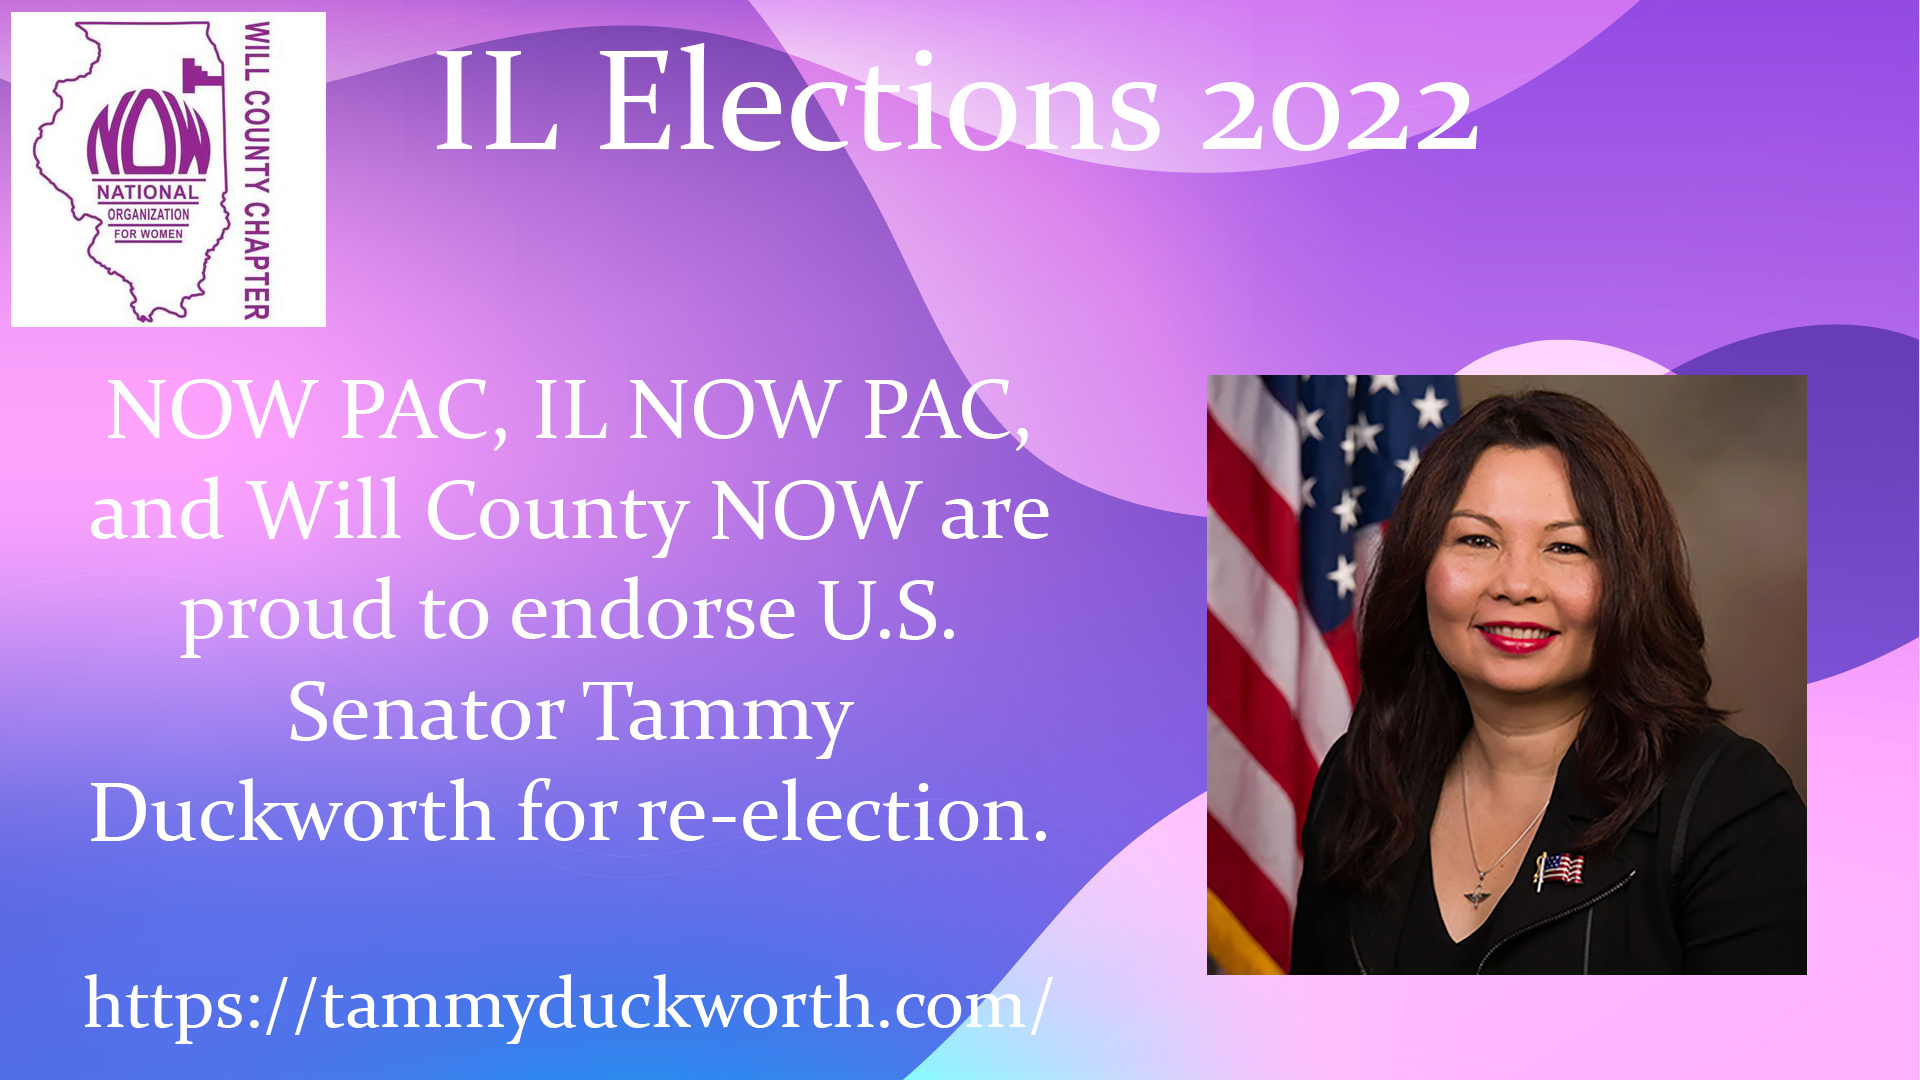 Will County NOW Endorses U.S. Senator Tammy Duckworth for Re-Election